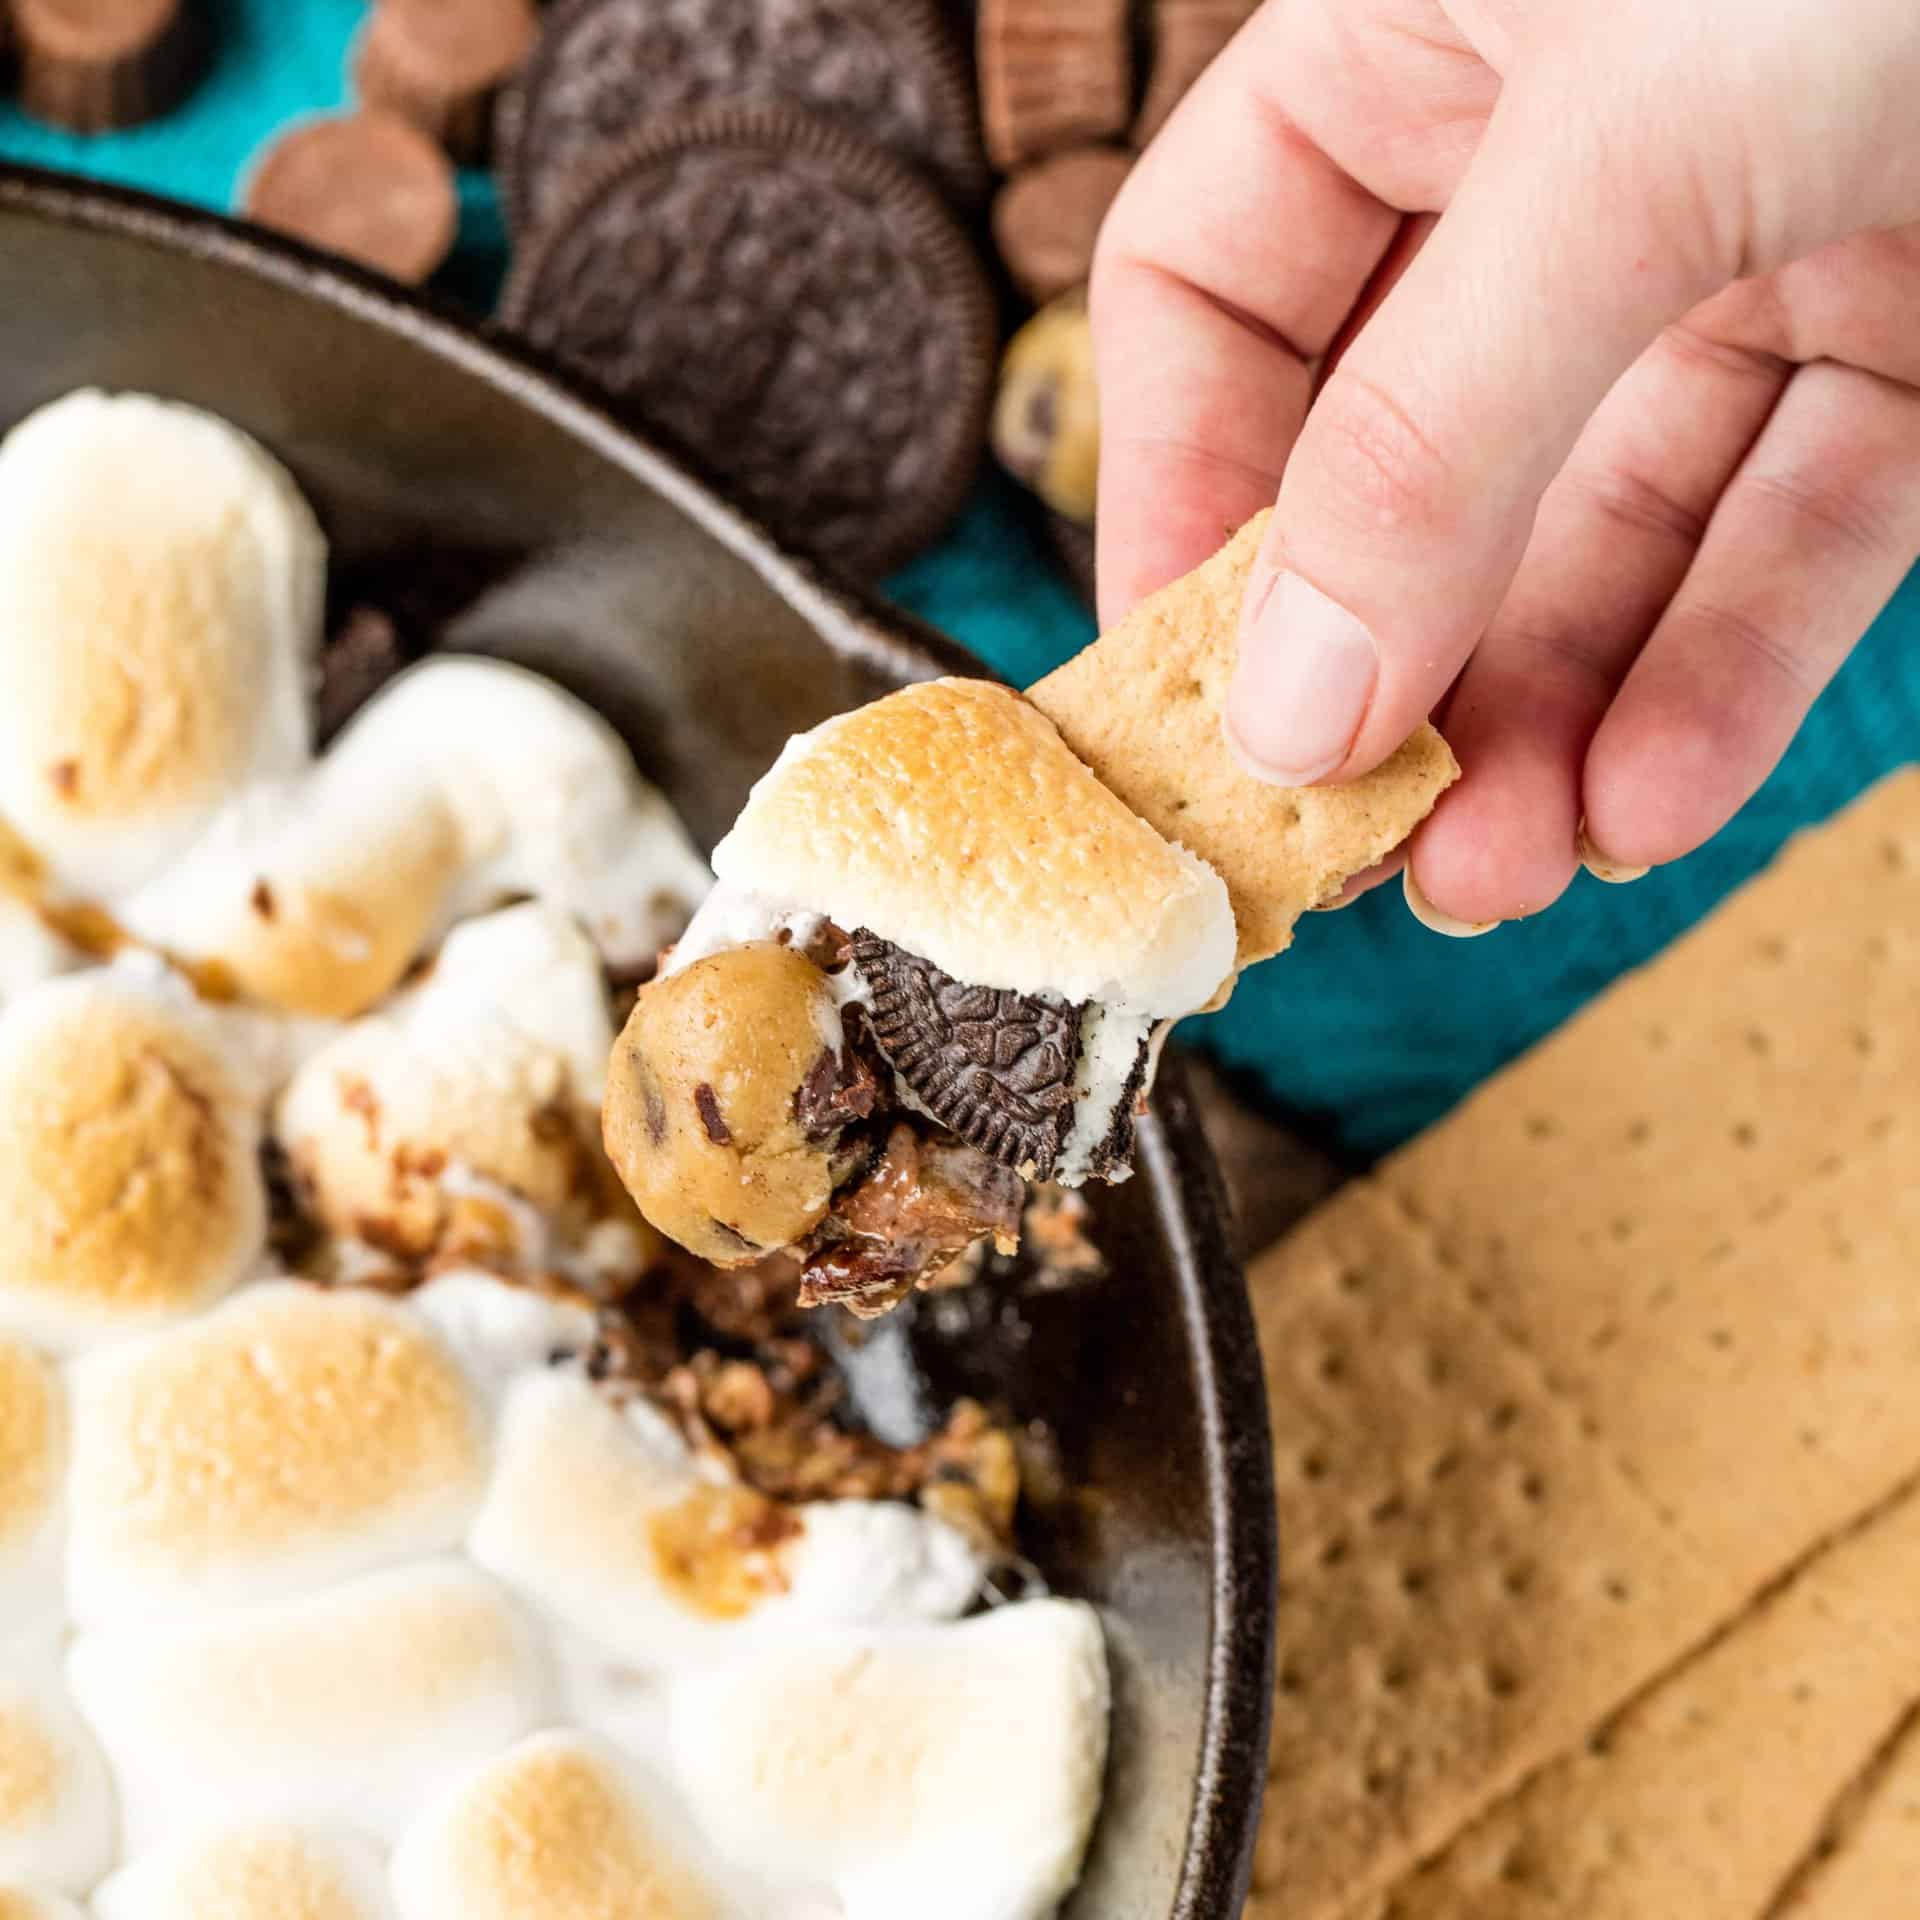 Rachel scoops a bite of million dollar skillet s'mores from a cast iron skillet full of marshmallow, cookie dough, Oreo, and other melty goodness